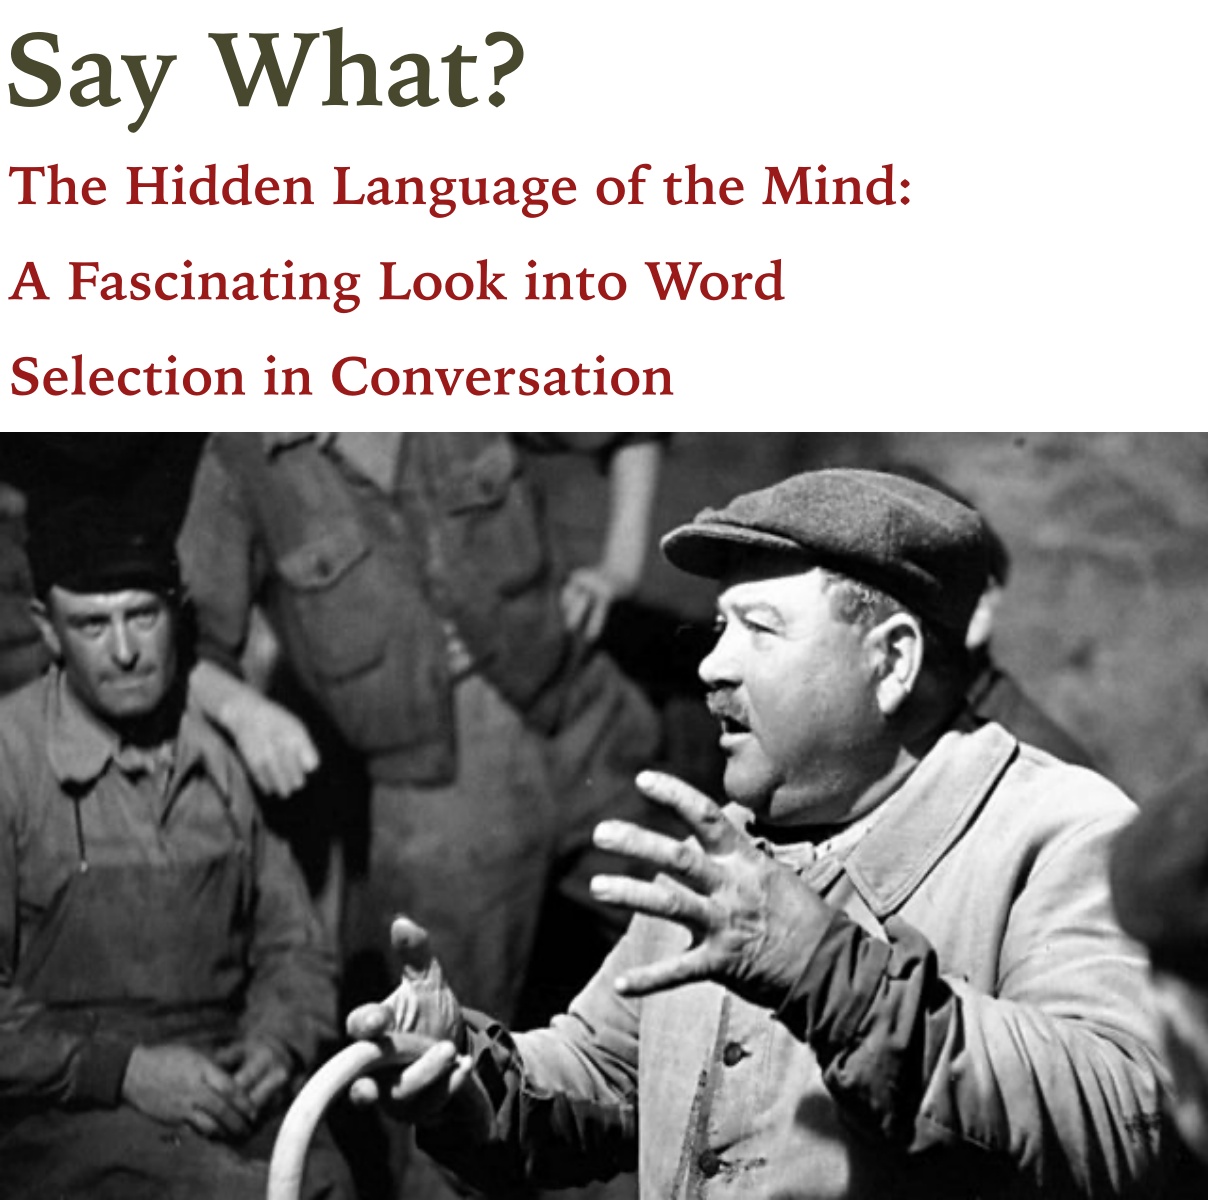 Say What? The Amazing Story of How Your Brain Select words to Communicate Effectively